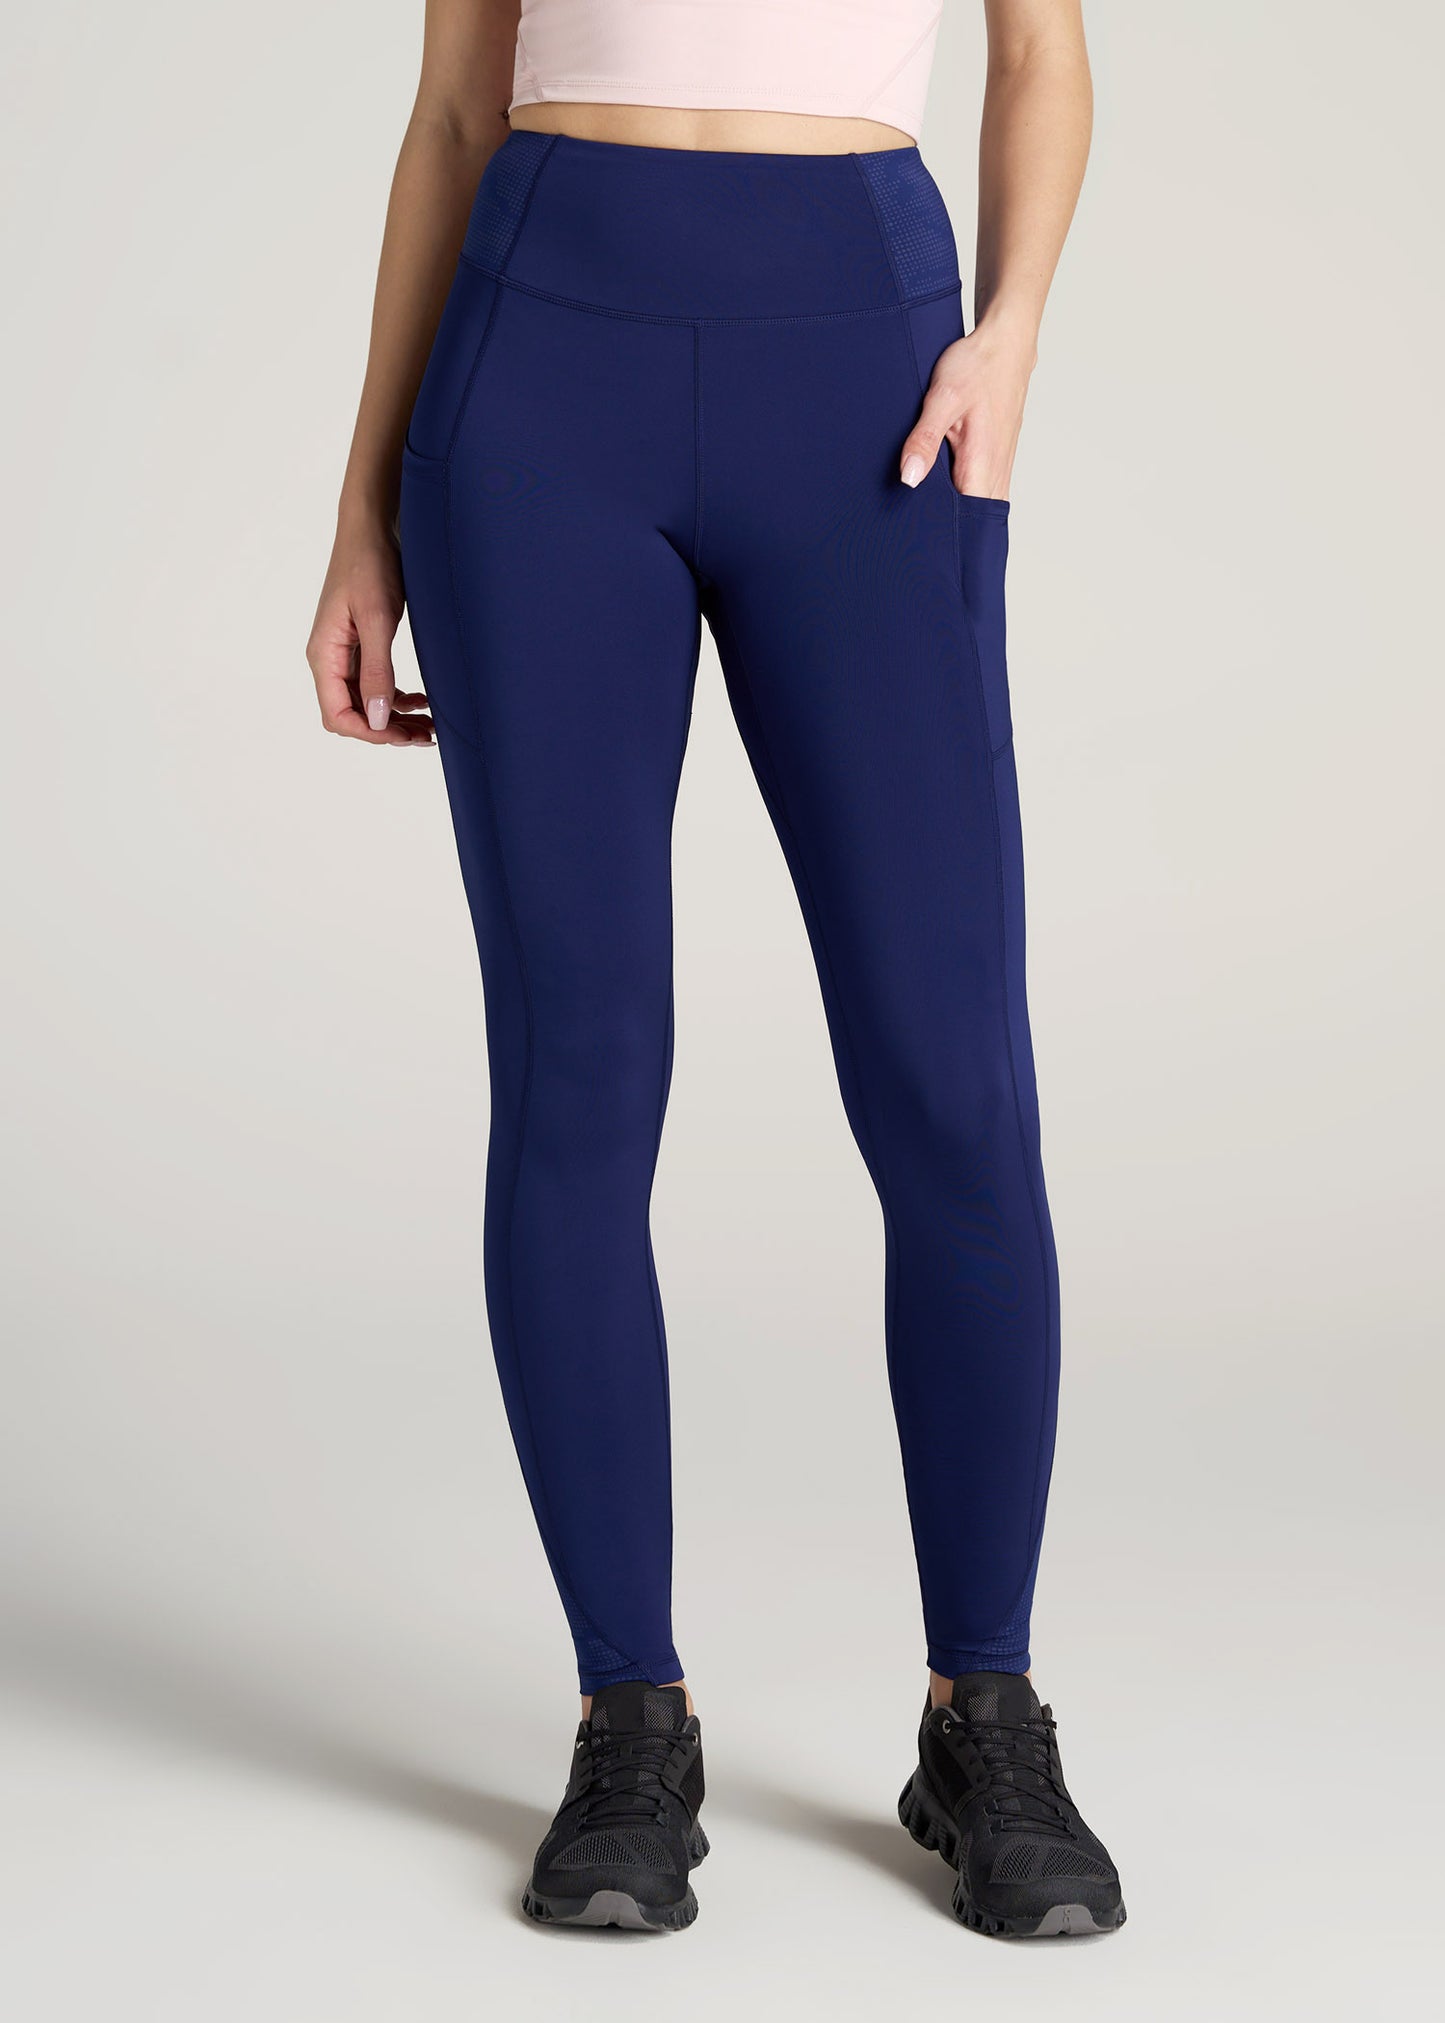 Women's Tall Reflective Active Legging With Pockets Midnight Blue –  American Tall